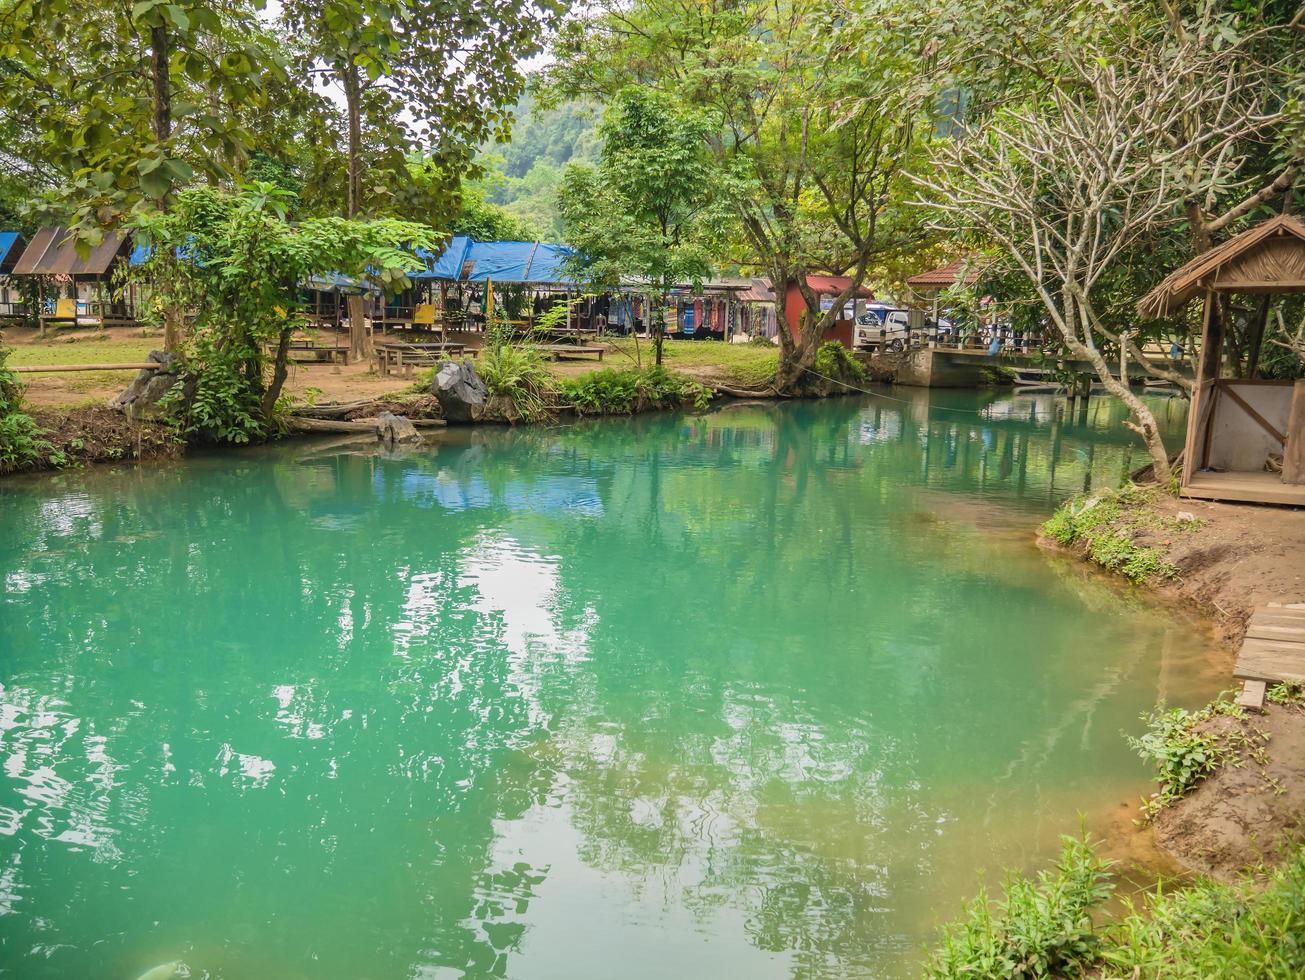 Vangvieng.lao-10 Dec 2017.Beautiful nature and clear water of Blue lagoon at pukham cave vangvieng city Lao.Vangvieng City The famous holiday destination town in Lao. photo